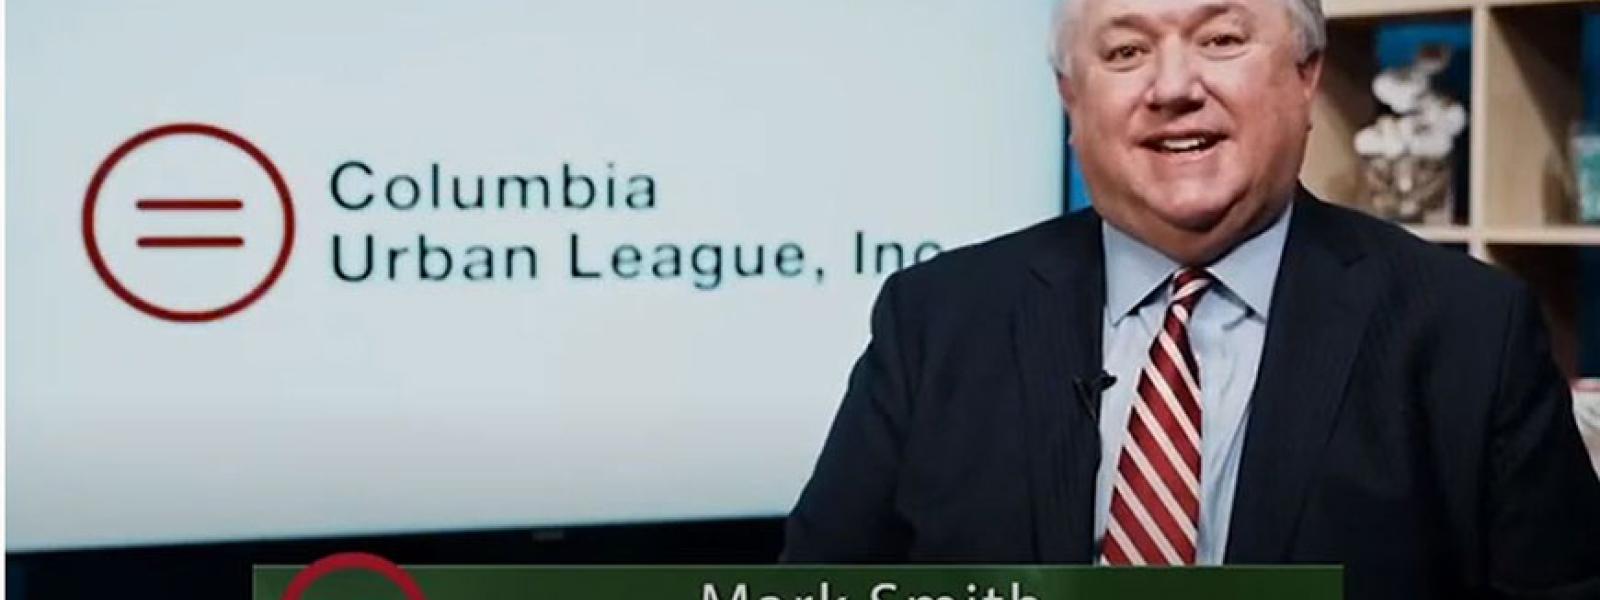 Dr. Mark A. Smith addresses the Columbia Urban League in video. 